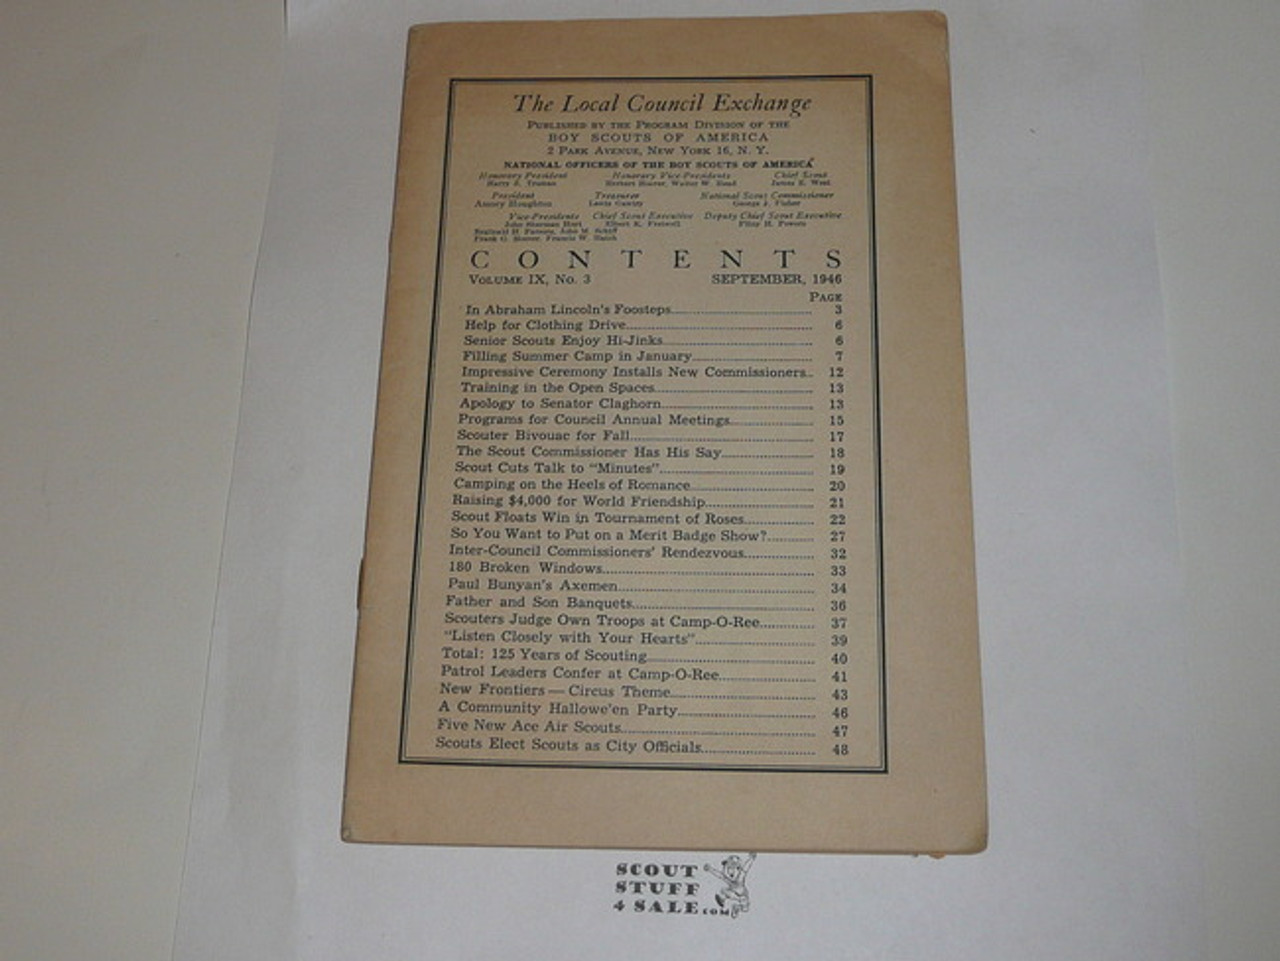 1946 (September) The Local Council Exchange, A leaders' Digest, Missing cover